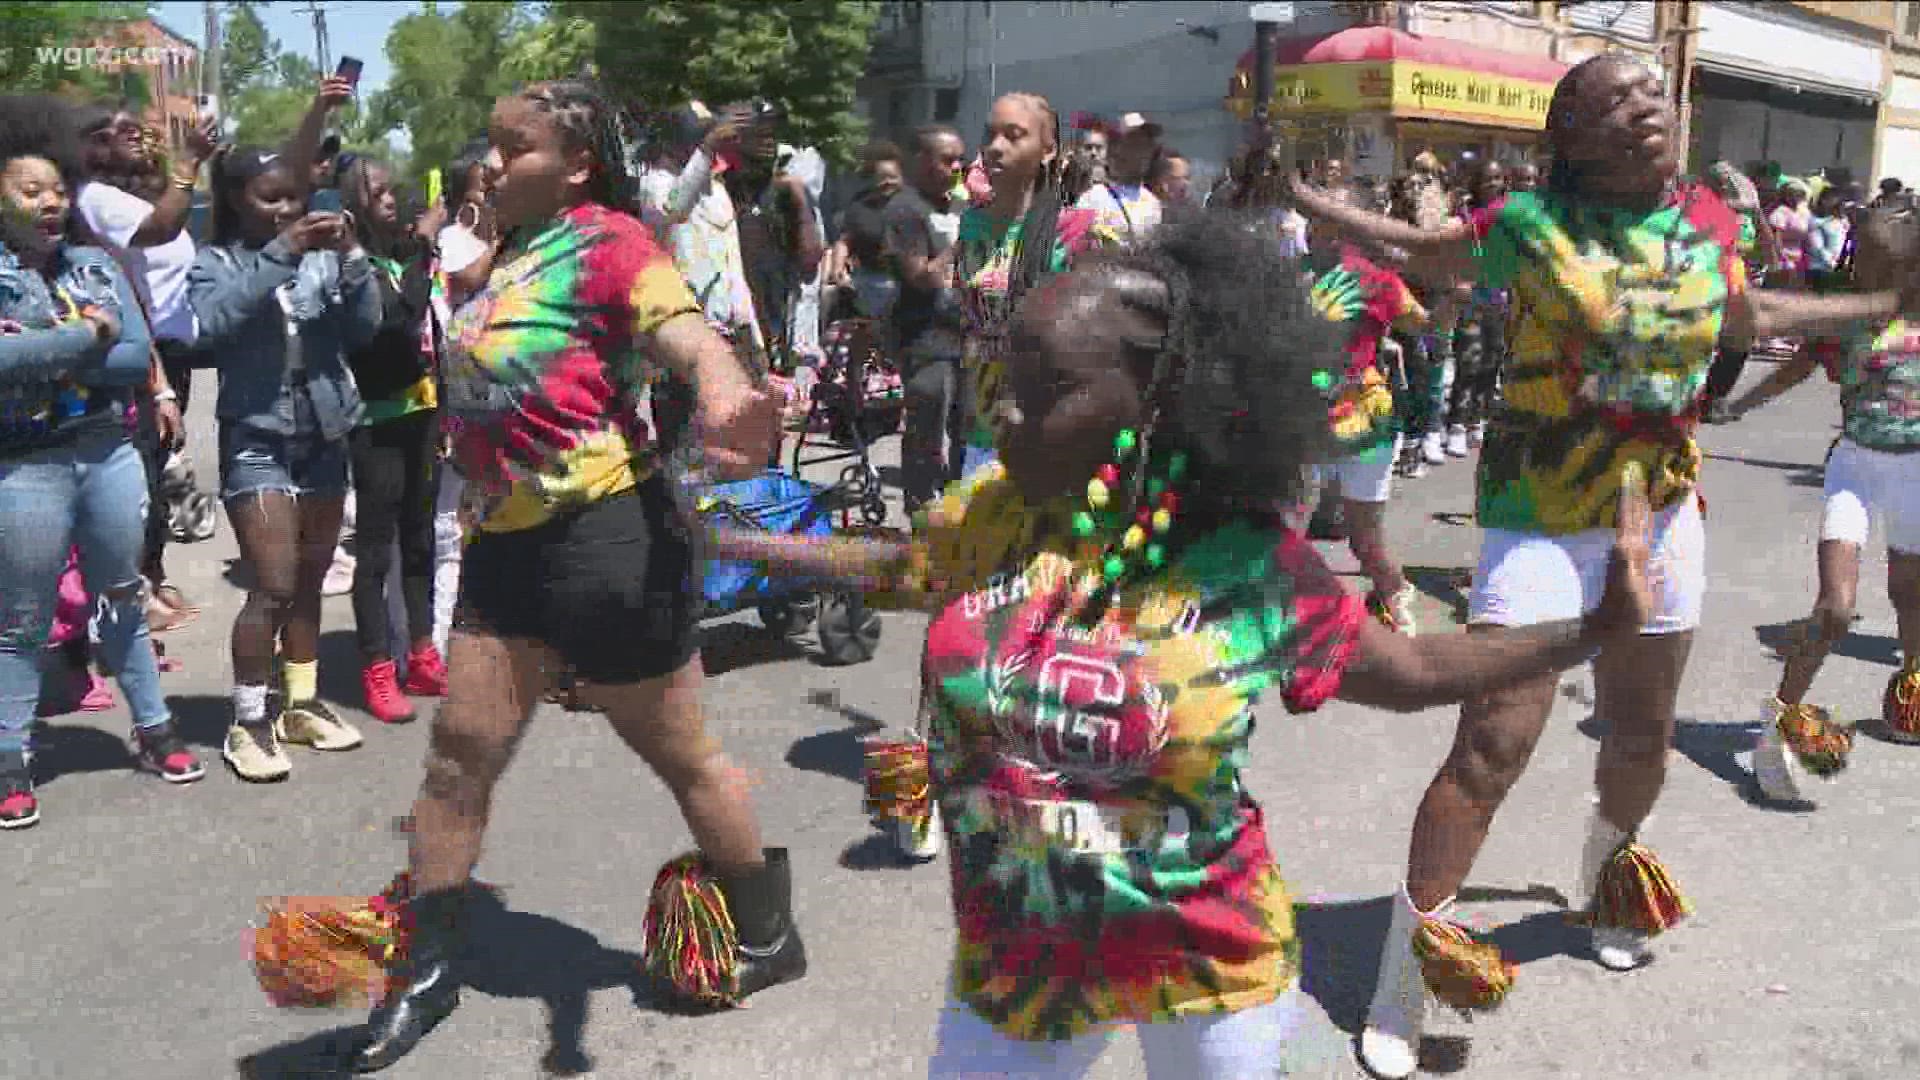 Buffalo has one of the country's largest Juneteenth celebrations outside of Texas and today was all about the parade.